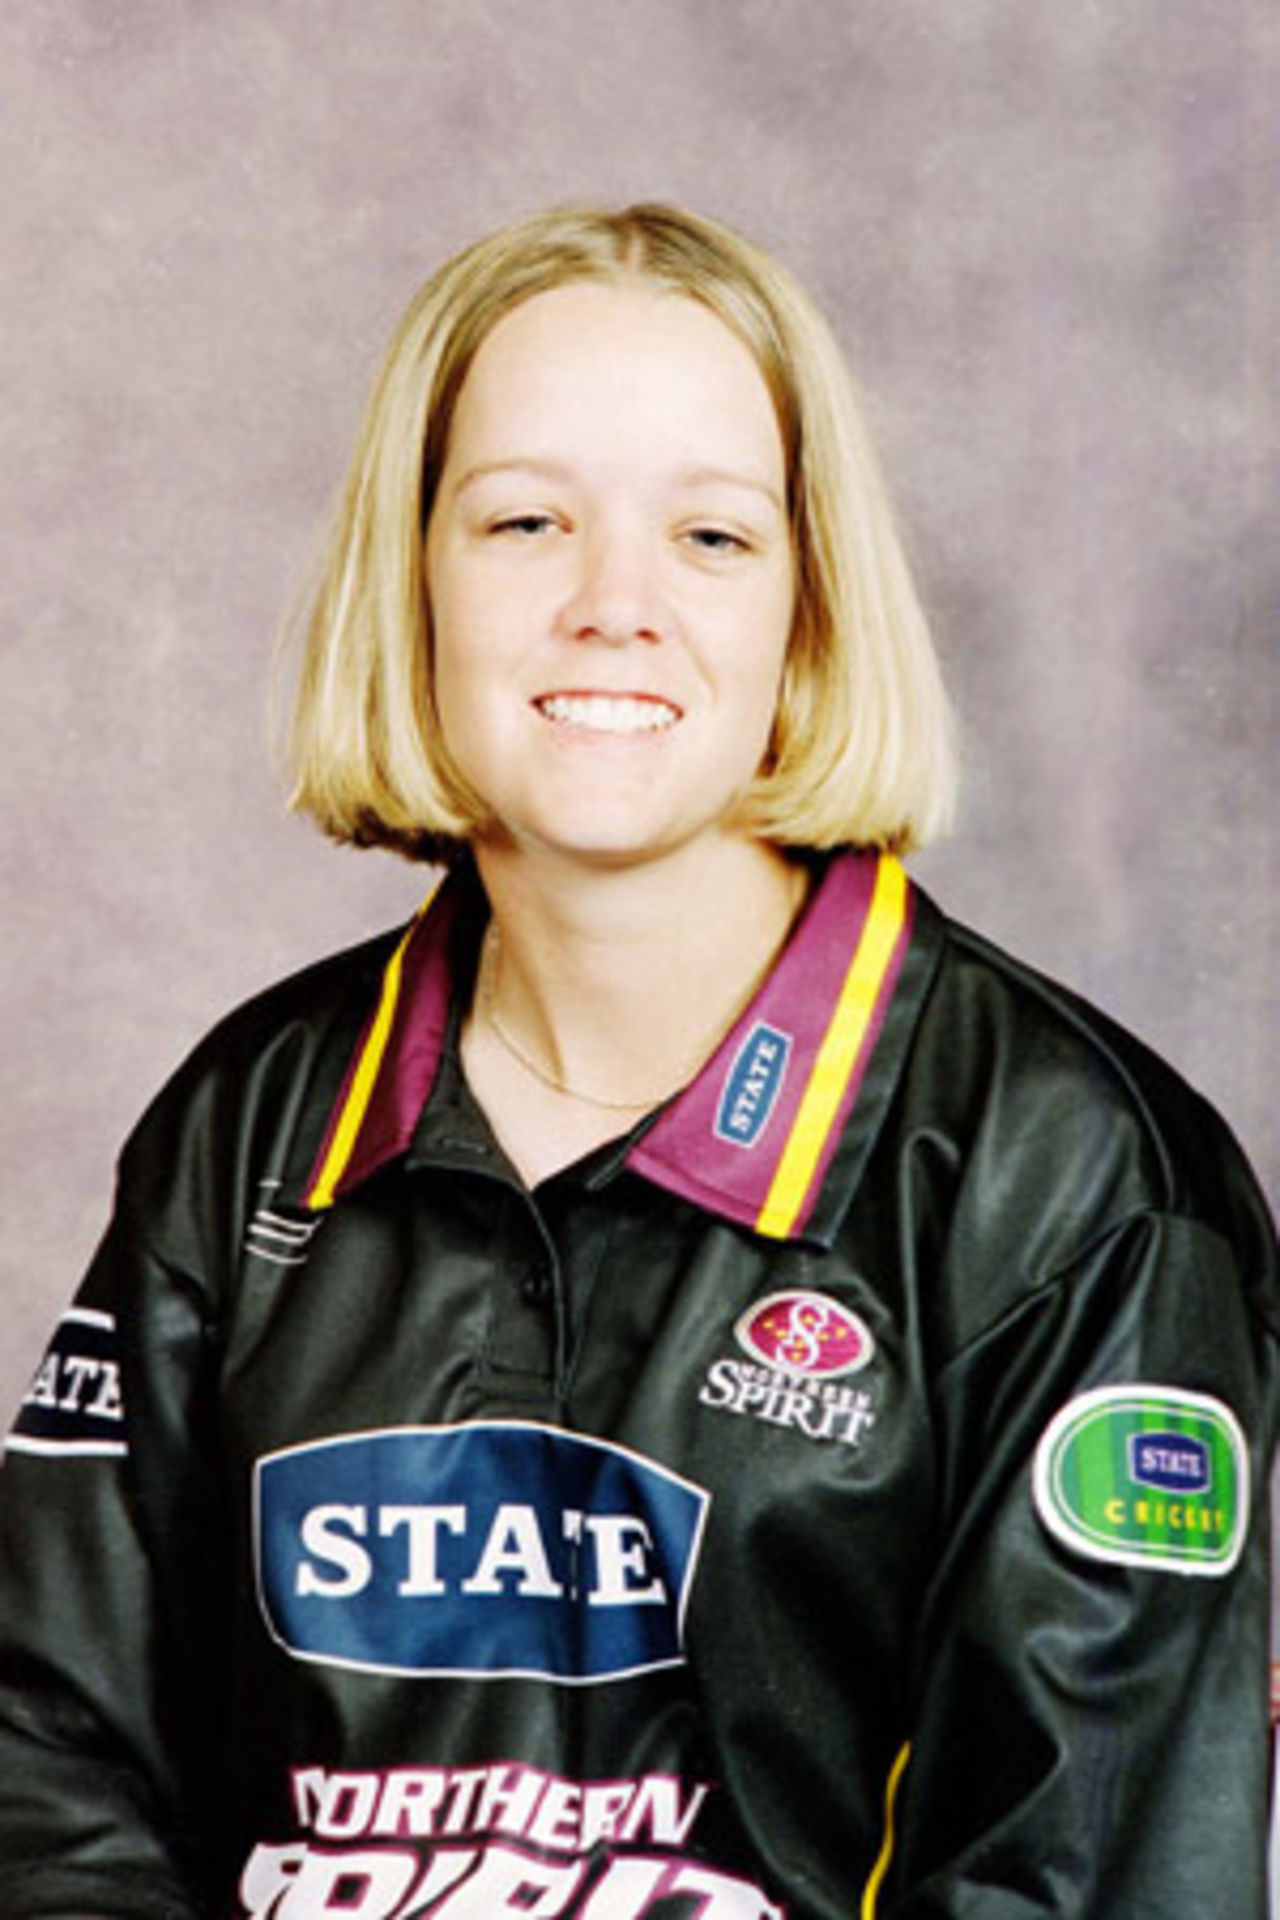 Portrait of Haylee Partridge, Northern Districts women's player in the 2001/02 season.